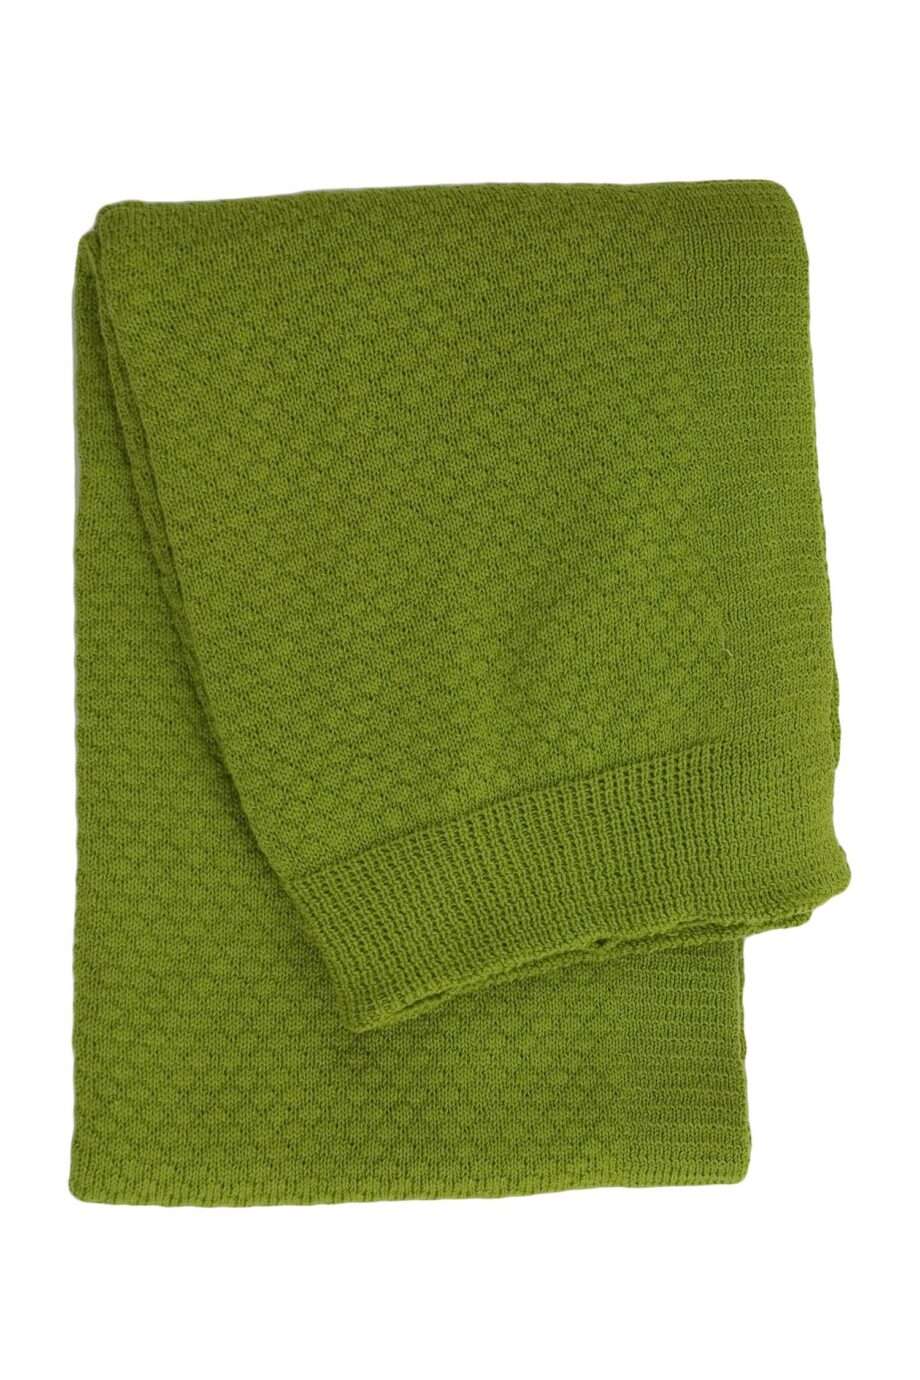 liz  knitted cotton little blanket small